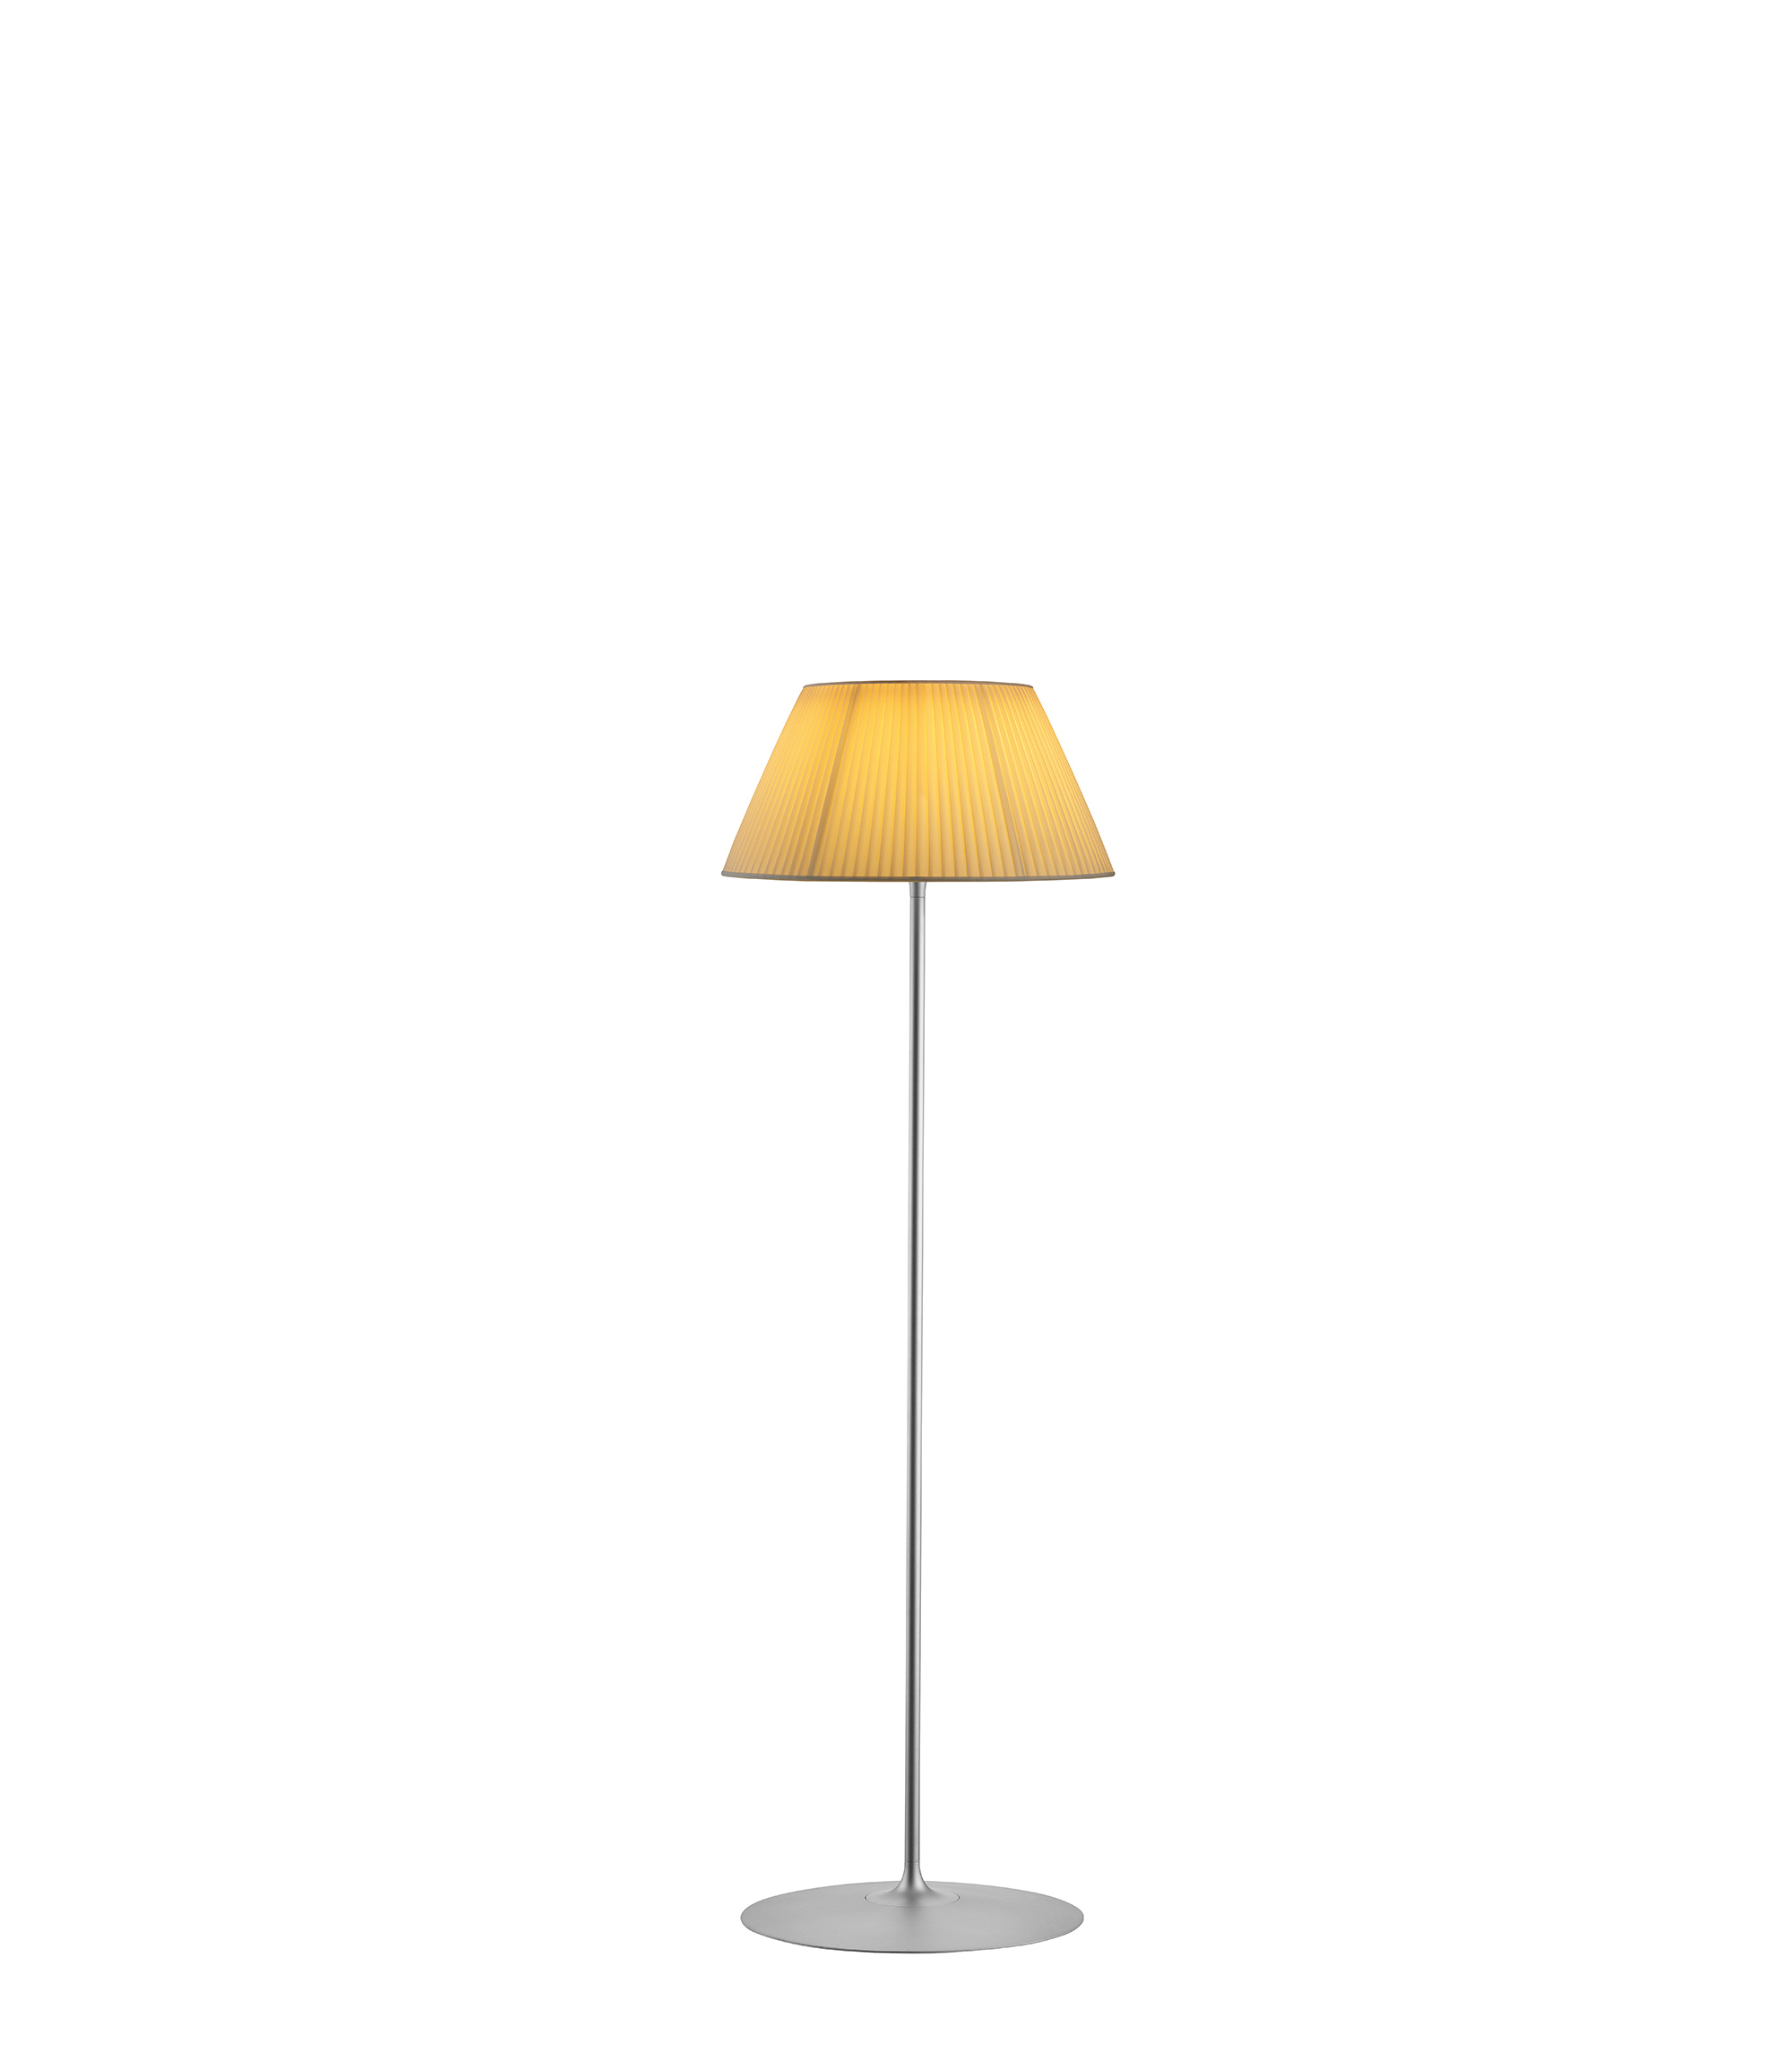 Romeo Soft Floor Lamp Floor Flos intended for size 2000 X 2300